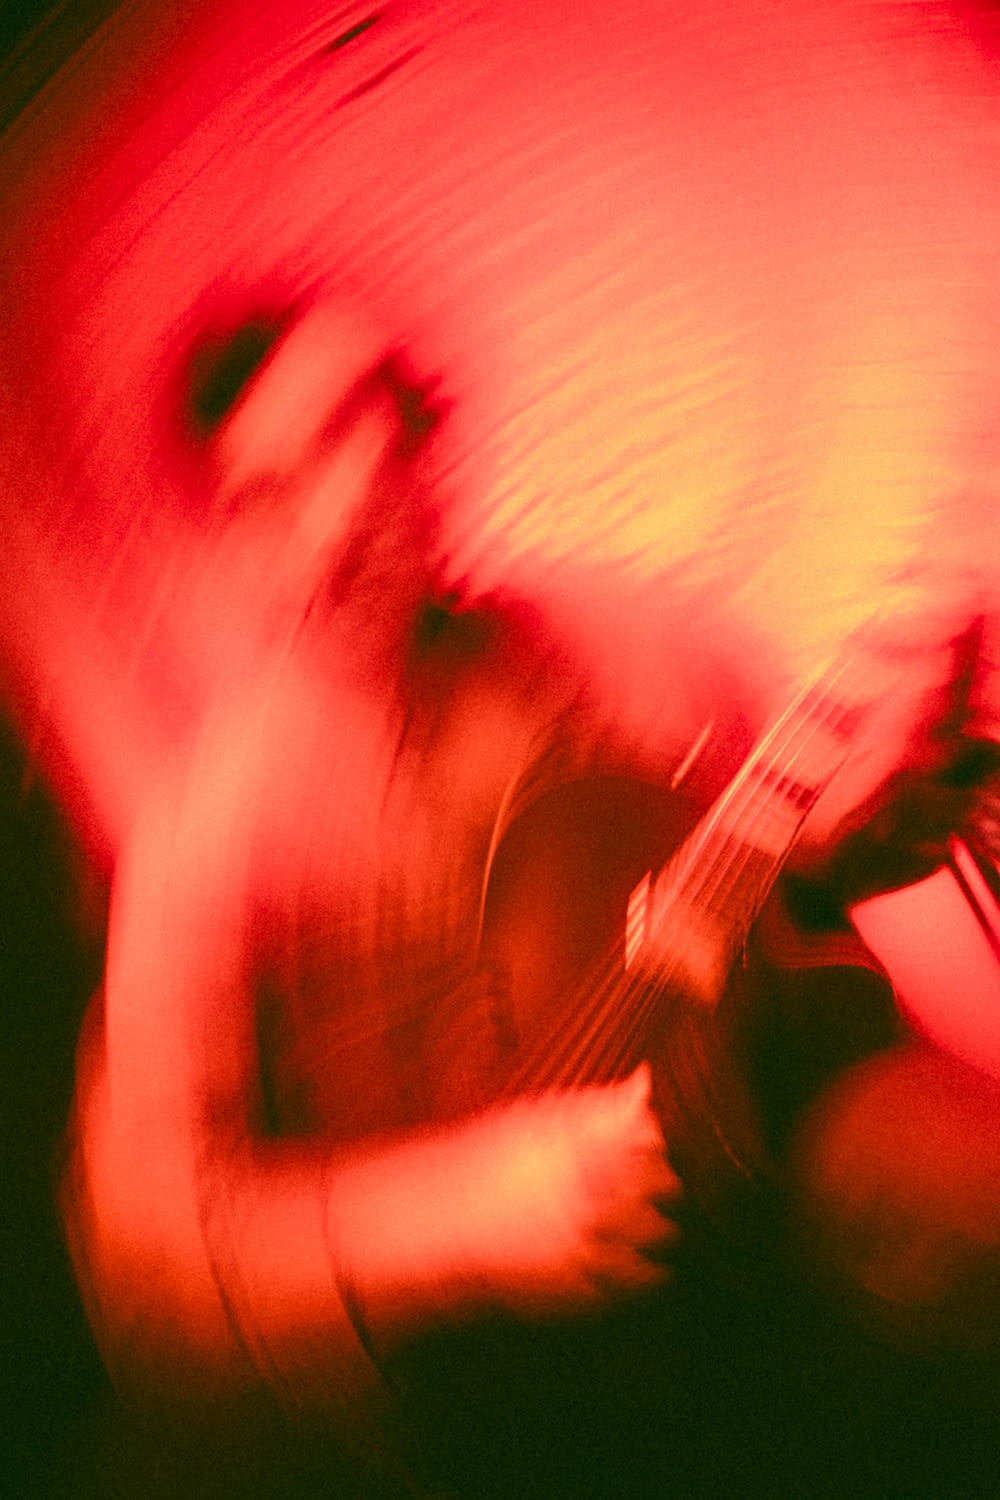 a blurry photo of a person playing a guitar